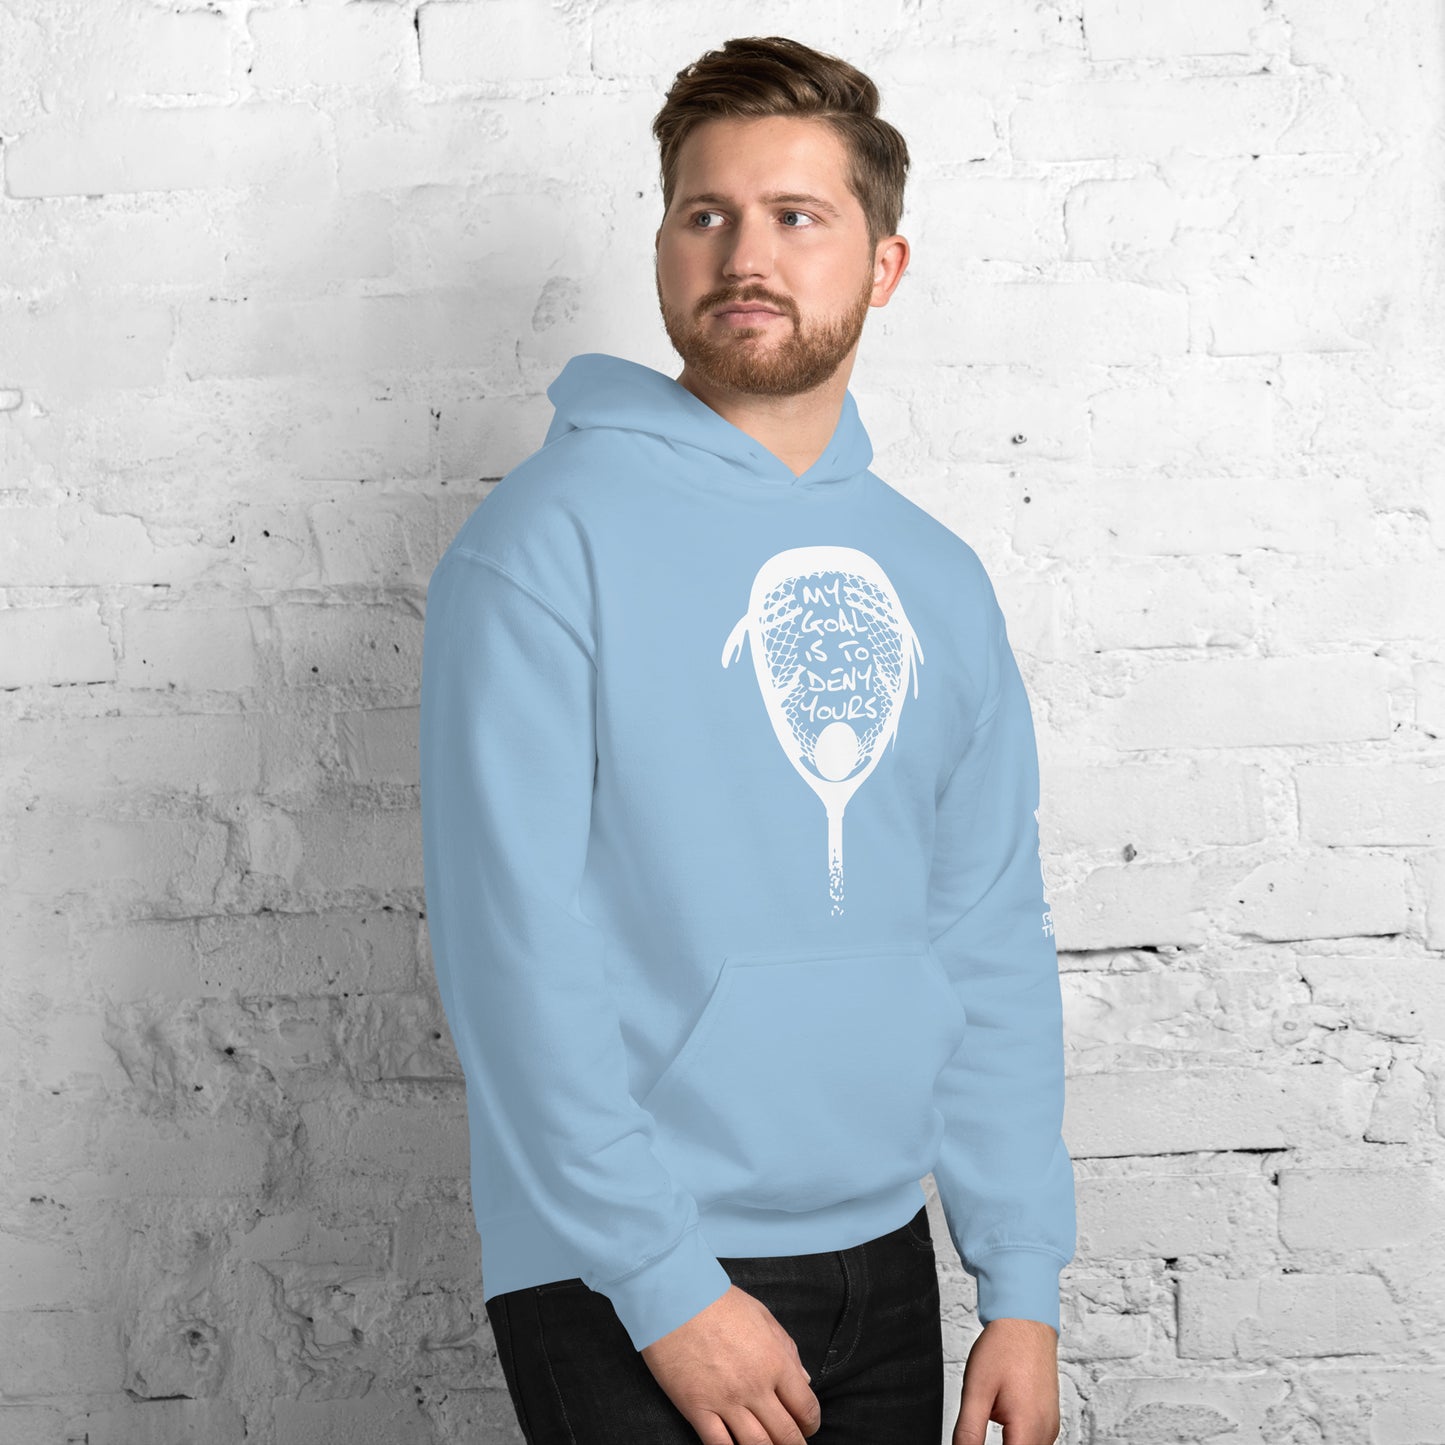 My goal is to deny yours lacrosse Unisex Hoodie